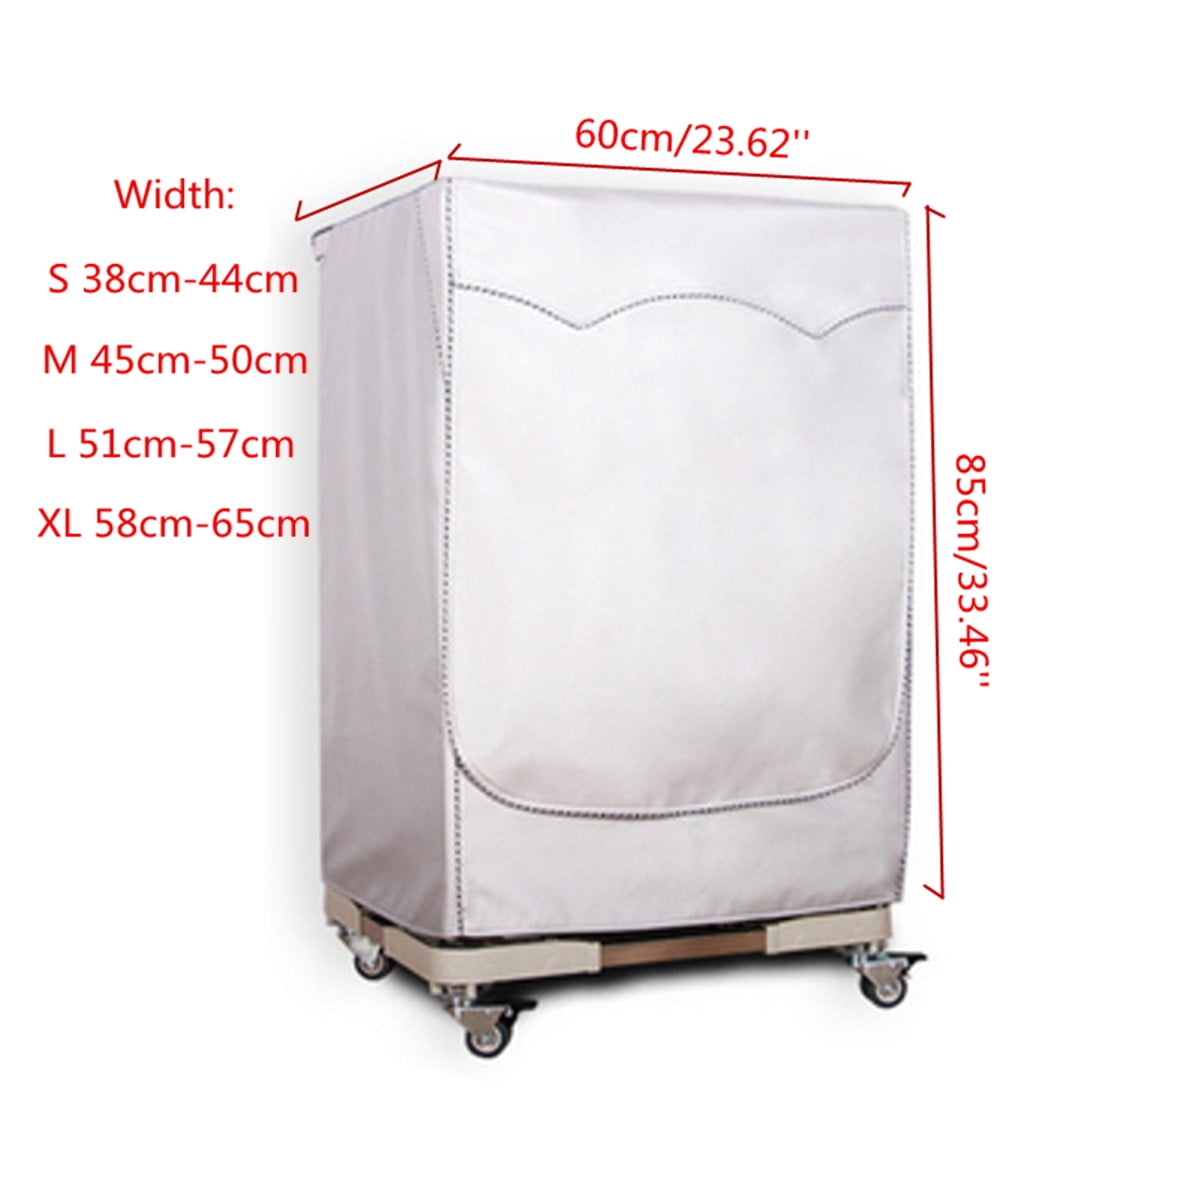 Dogggy 1PCS Washing Machine Cover For Front Load Washer Home Laundry Dryer Dust Proof Waterproof Sunscreen Thicker Fabric Zipper Design for Easy use Case Protective Dust Jacket 